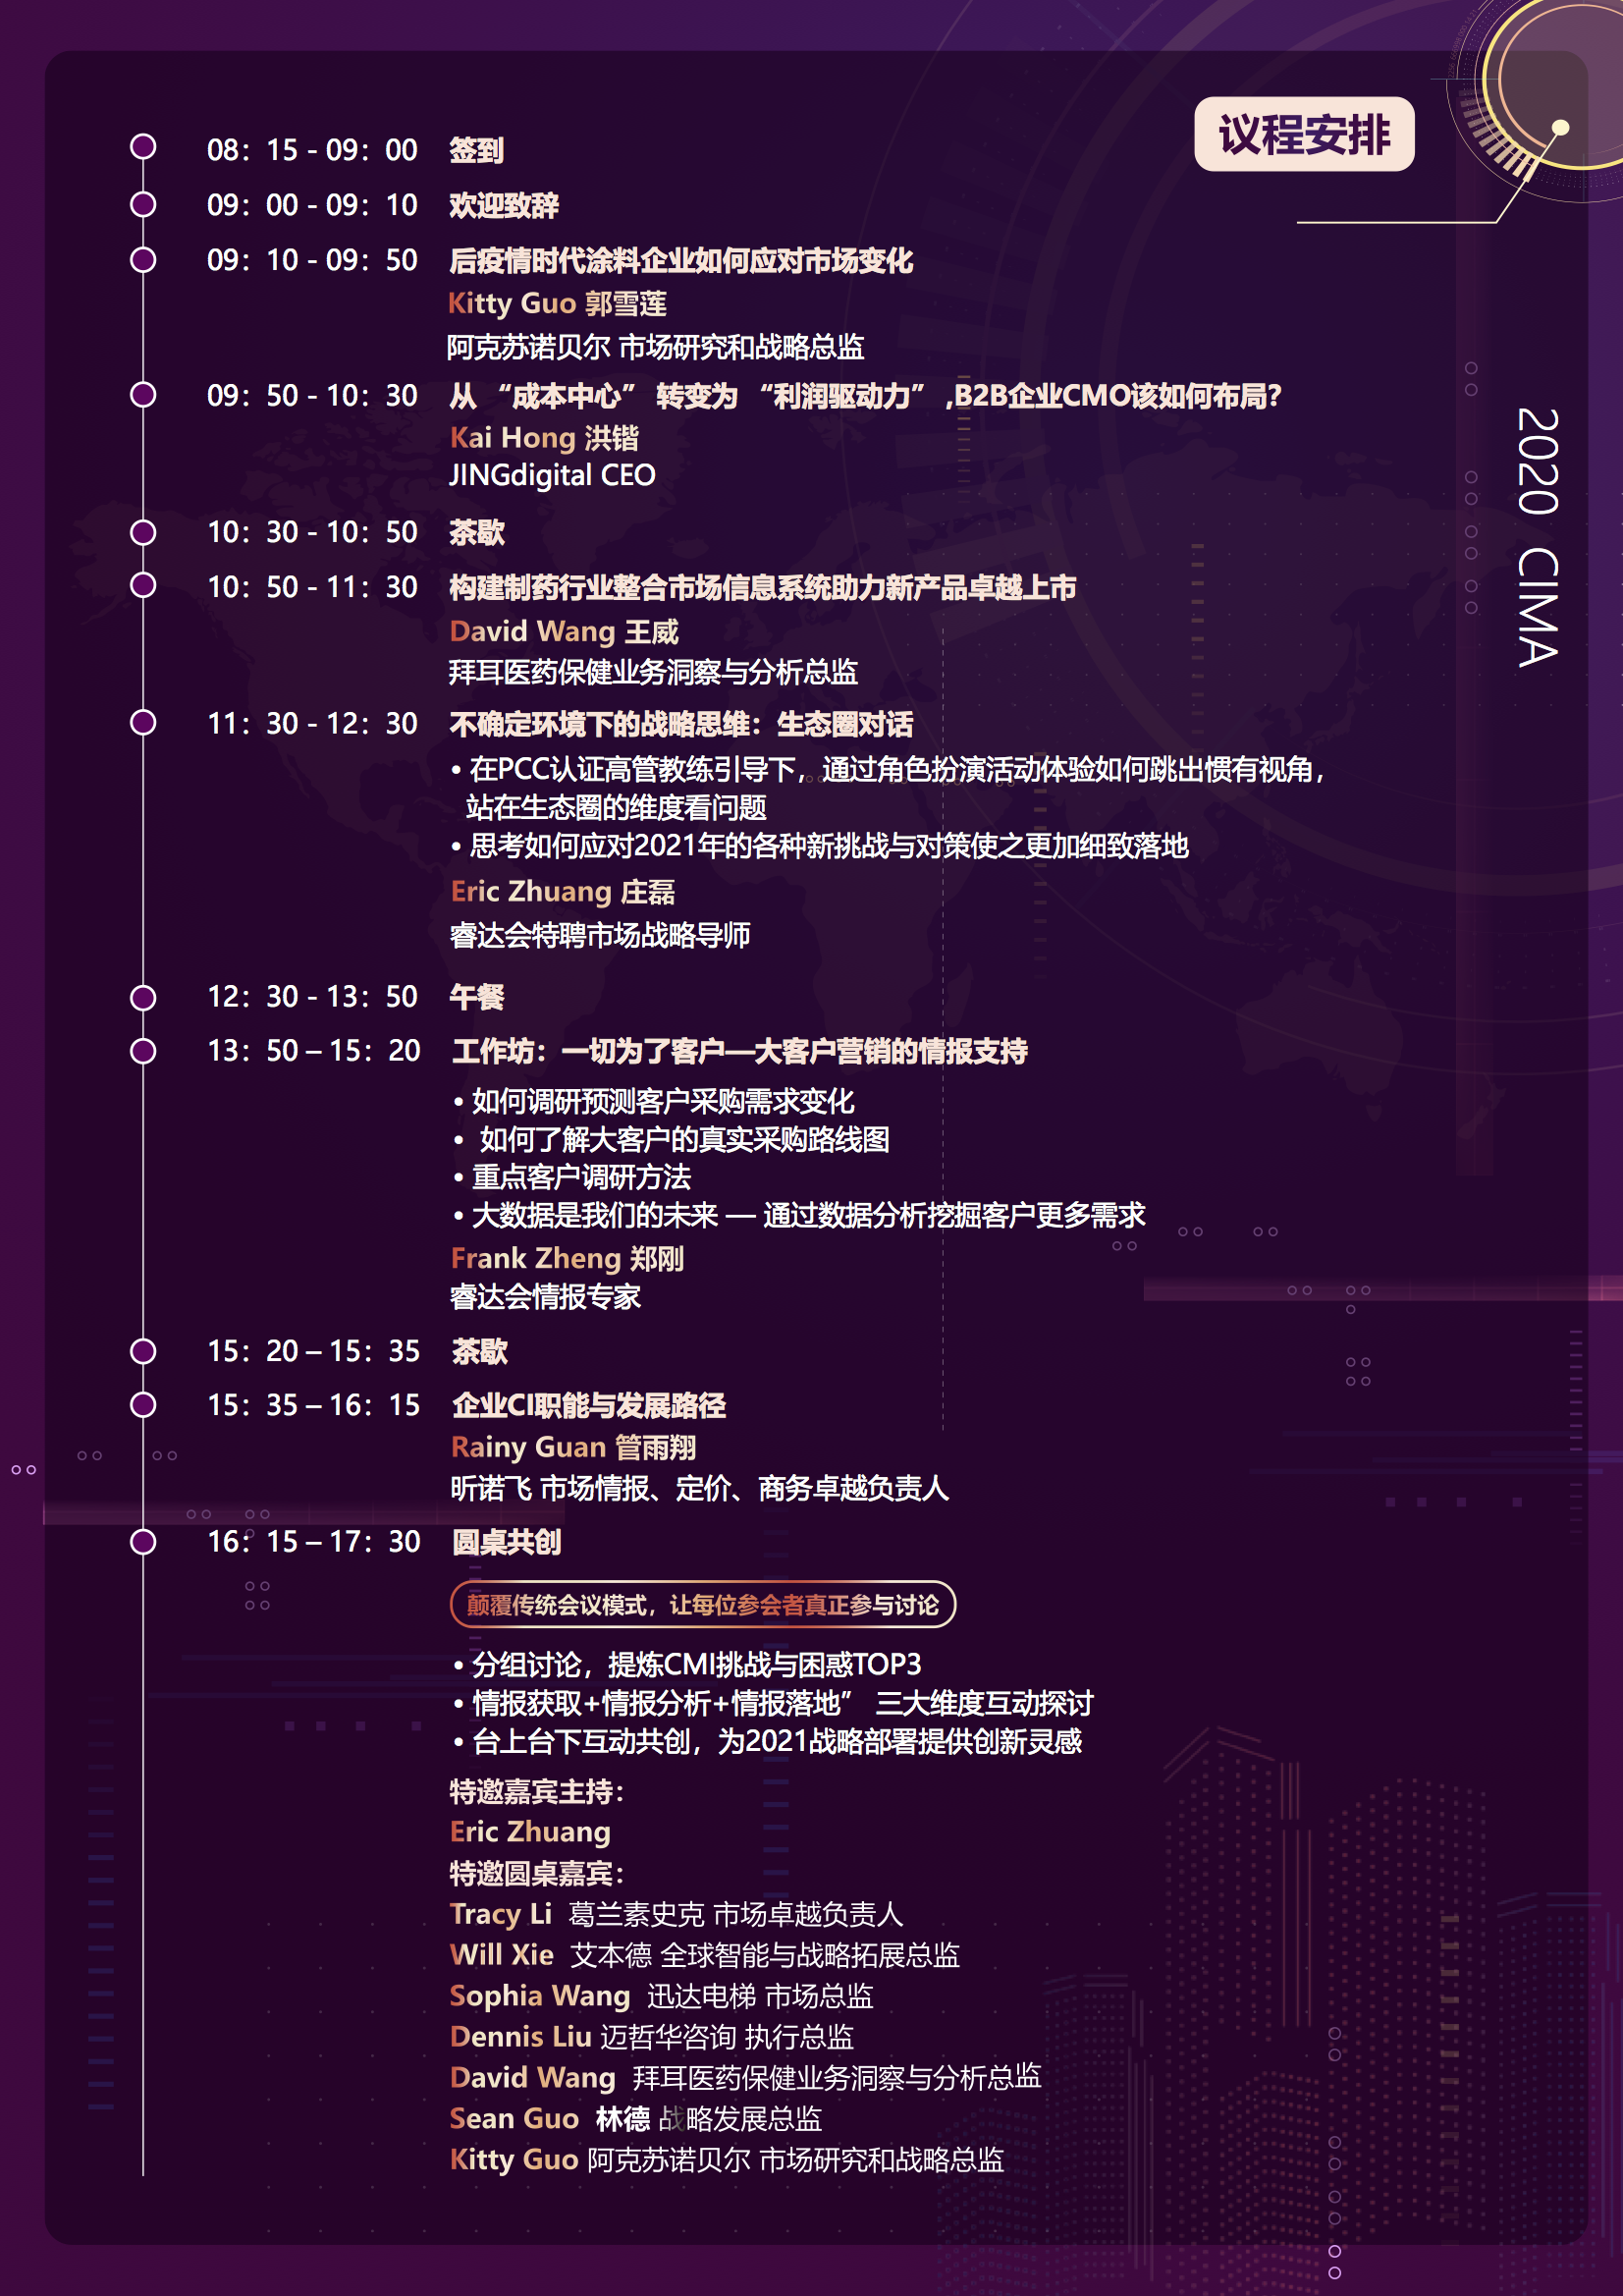 9th CIMA brochure updated4.png